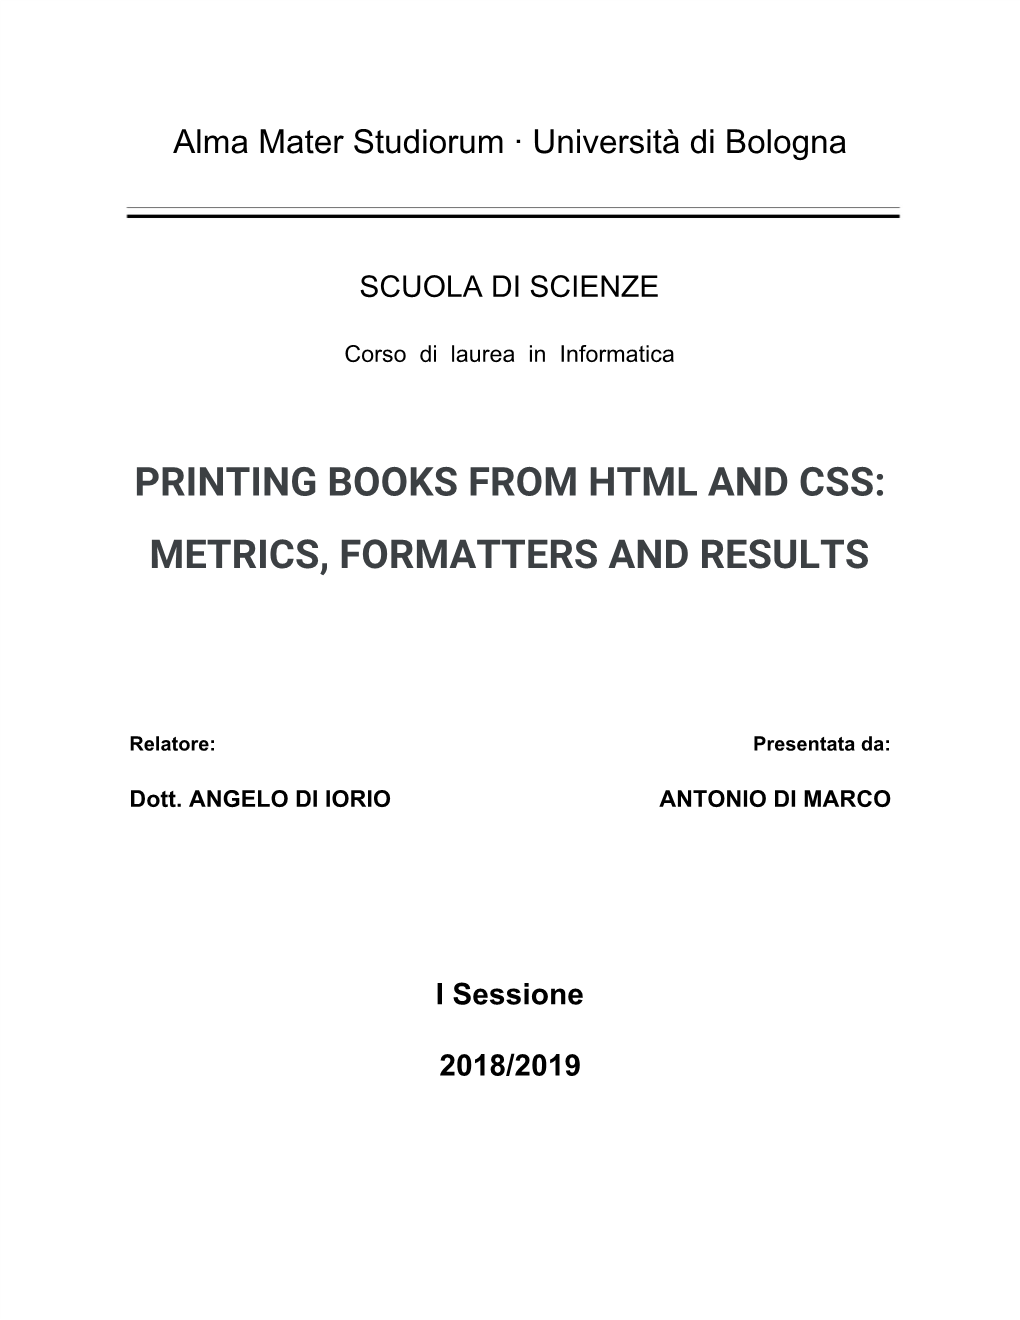 Printing Books from Html and Css: Metrics, Formatters and Results